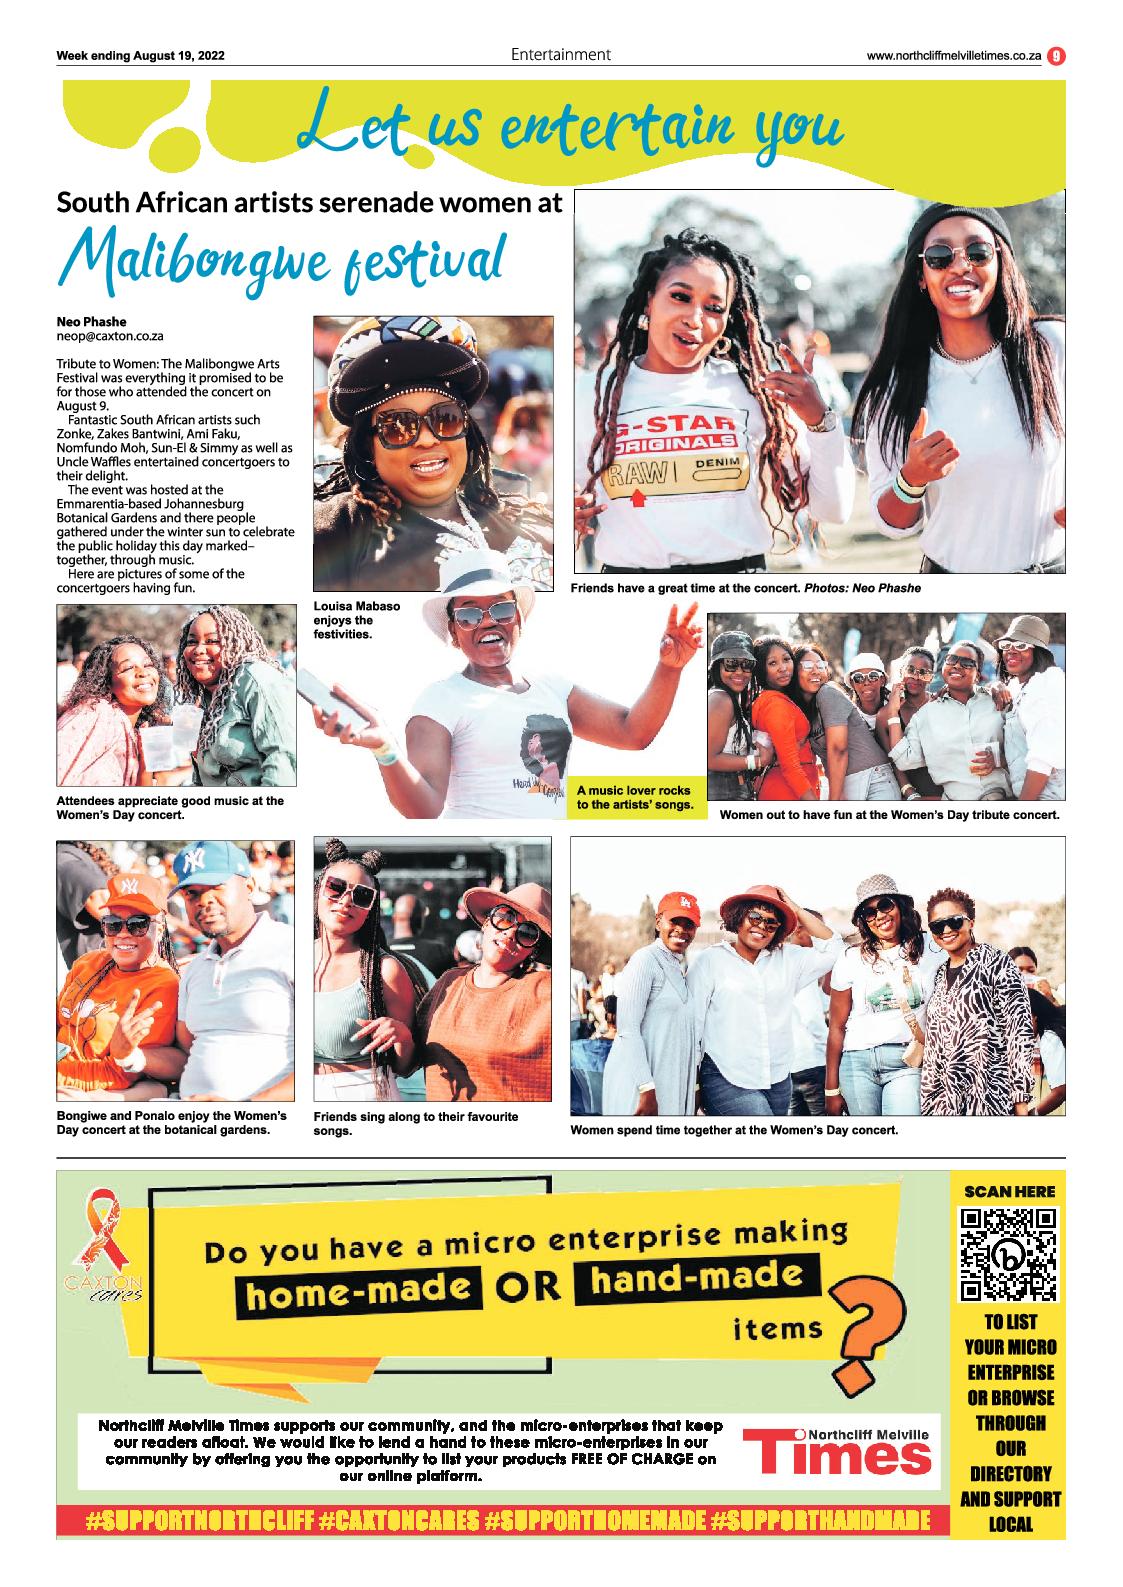 Northcliff Melville Times 19 August 2022 page 9